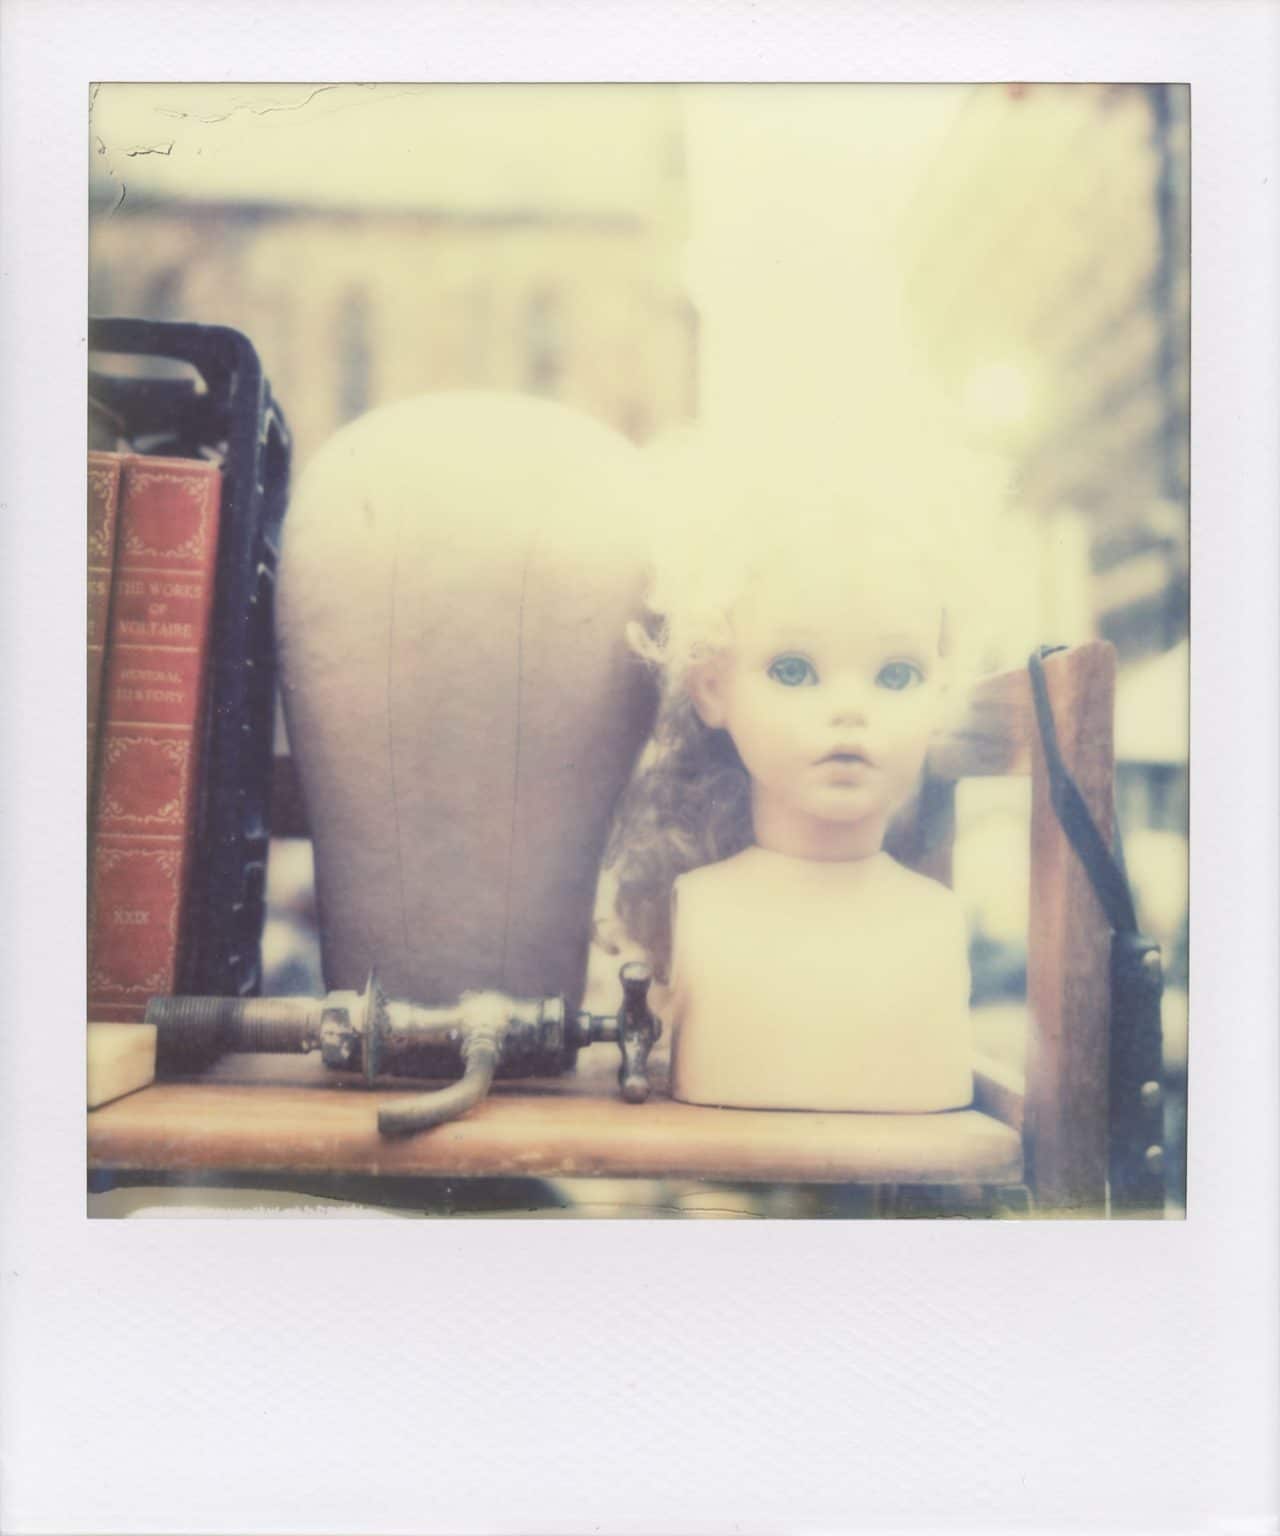 “Esther” (NYC 2013) - Polaroid SX-70 Alpha 1 Land Camera and Impossible PX 70 Cool film